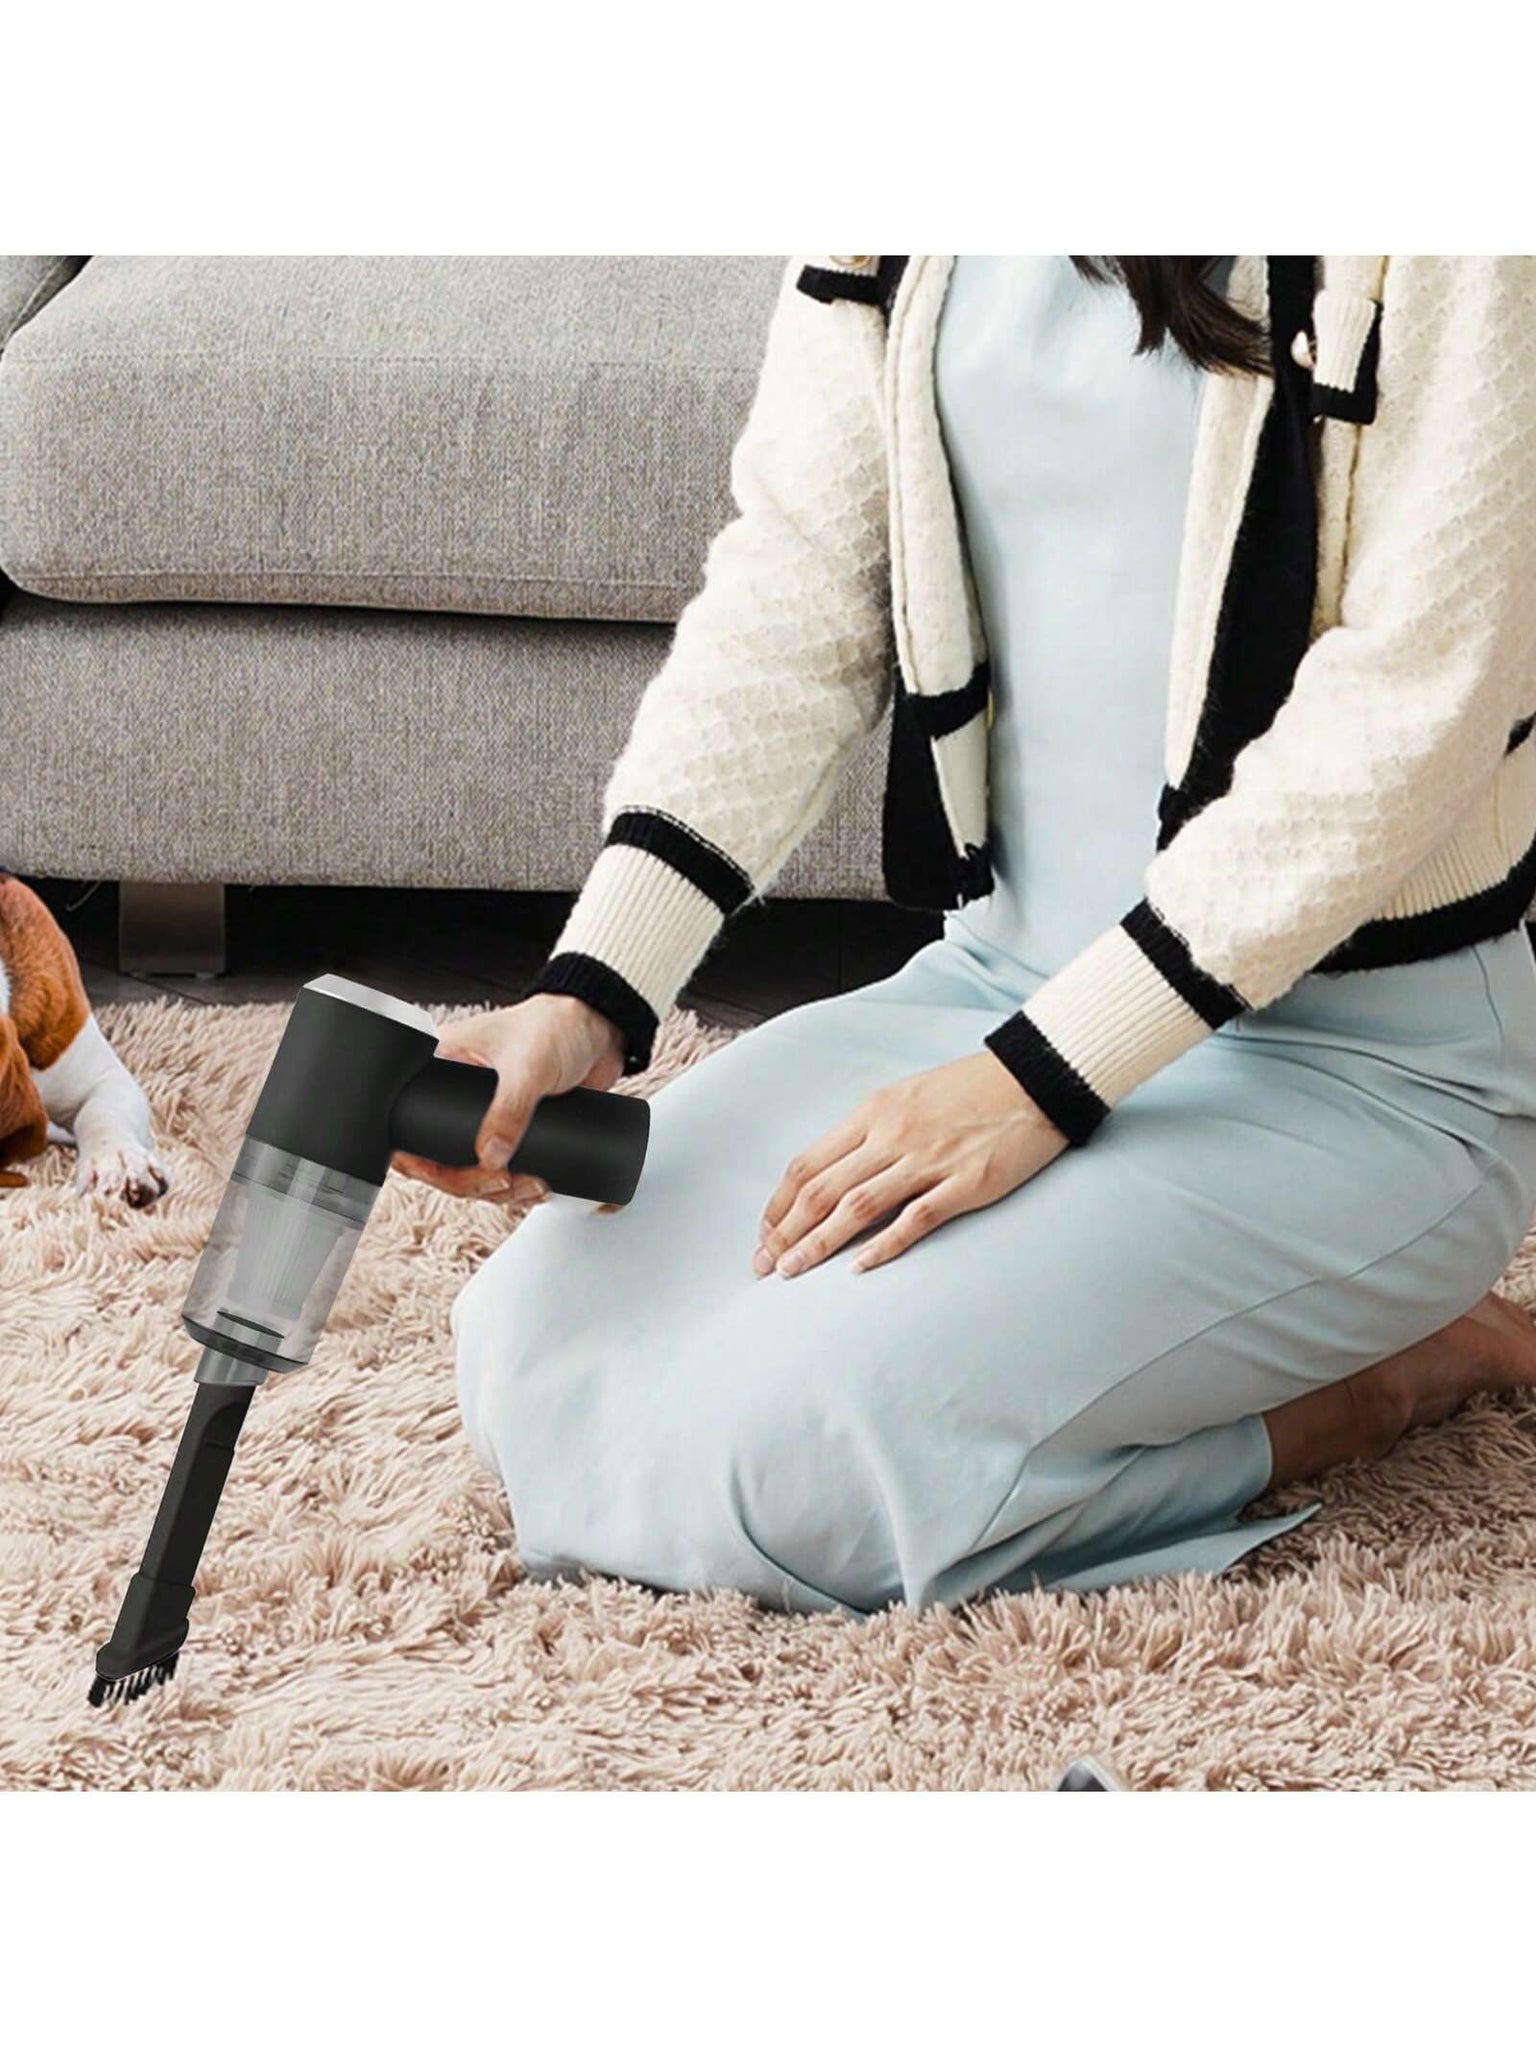 【upgraded Version】high-power Cordless Handheld Portable Vacuum Cleaner, Type-c Charging Port For Car And Home Use (white), Nozzle And Blocking Plate Included-Black-1